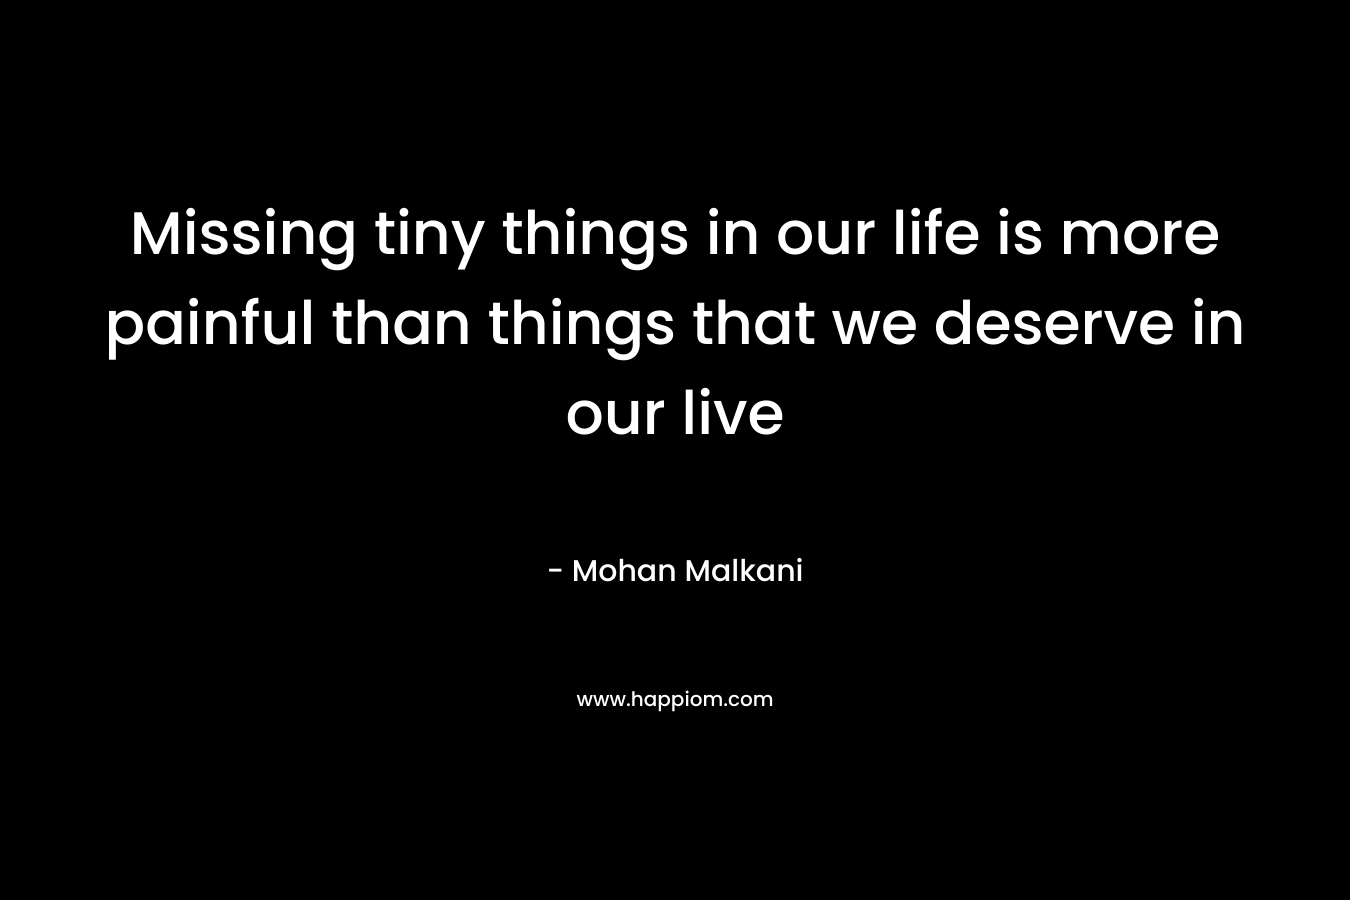 Missing tiny things in our life is more painful than things that we deserve in our live – Mohan Malkani